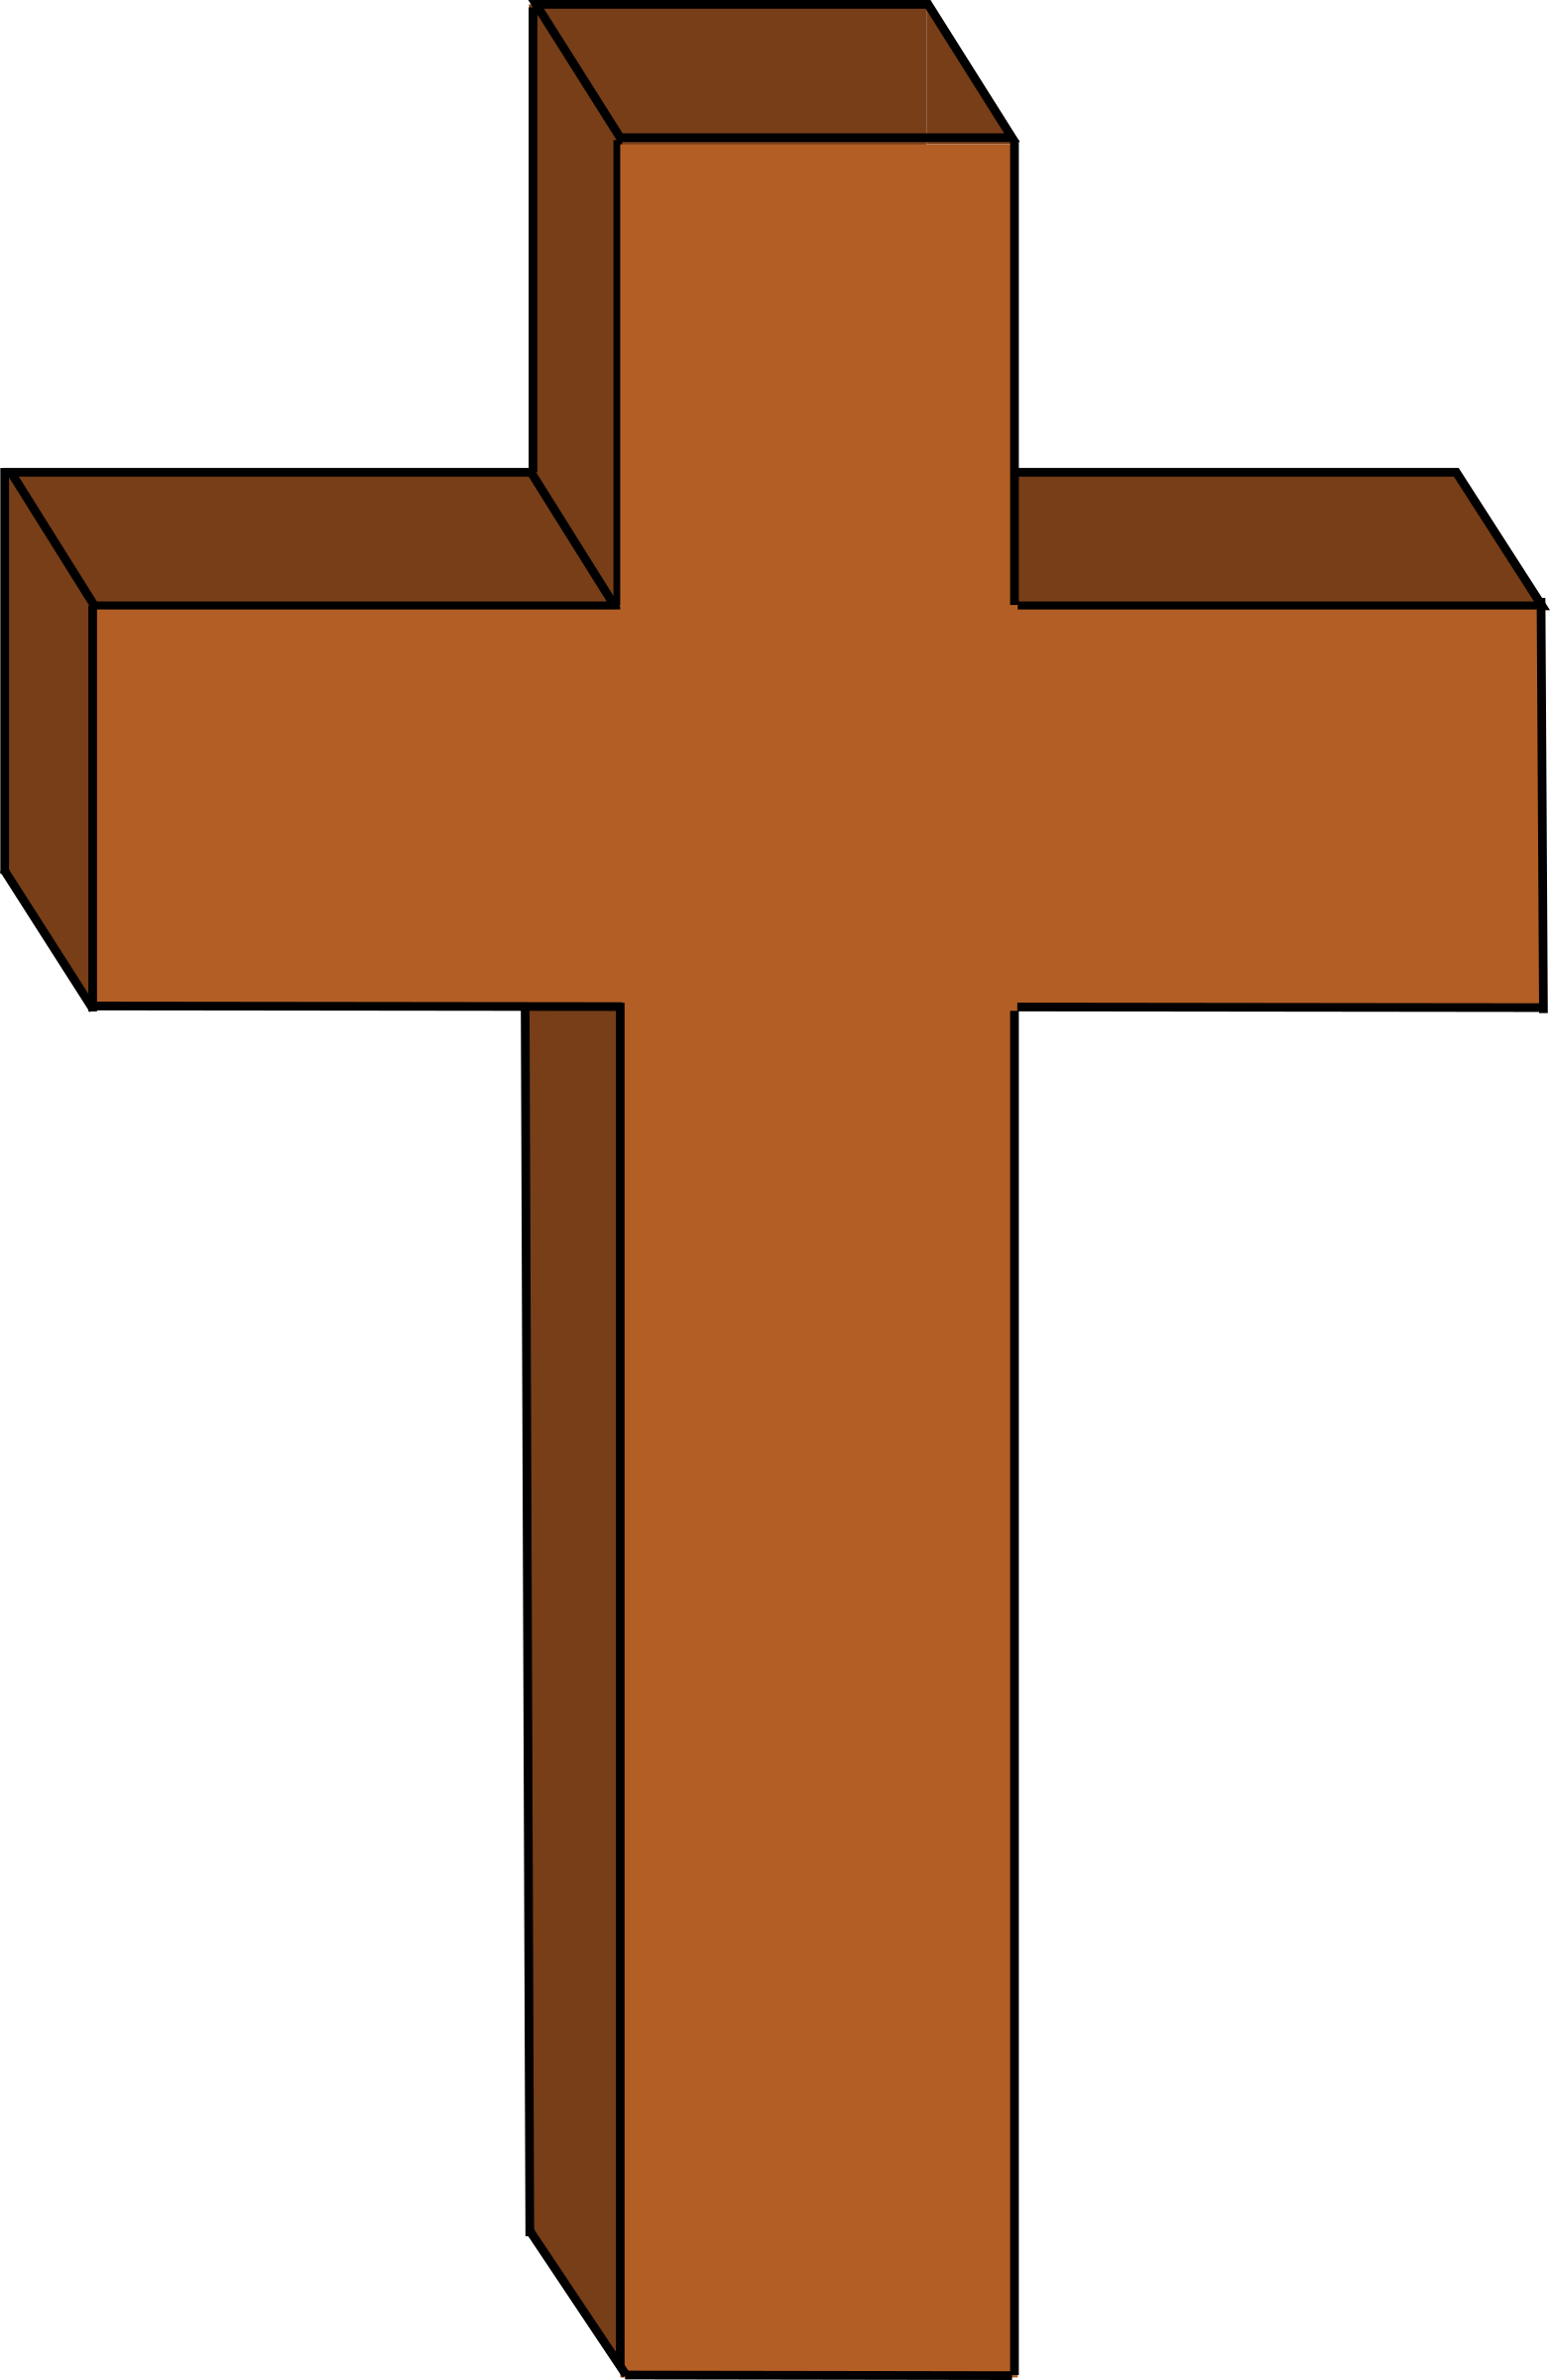 cross clipart images